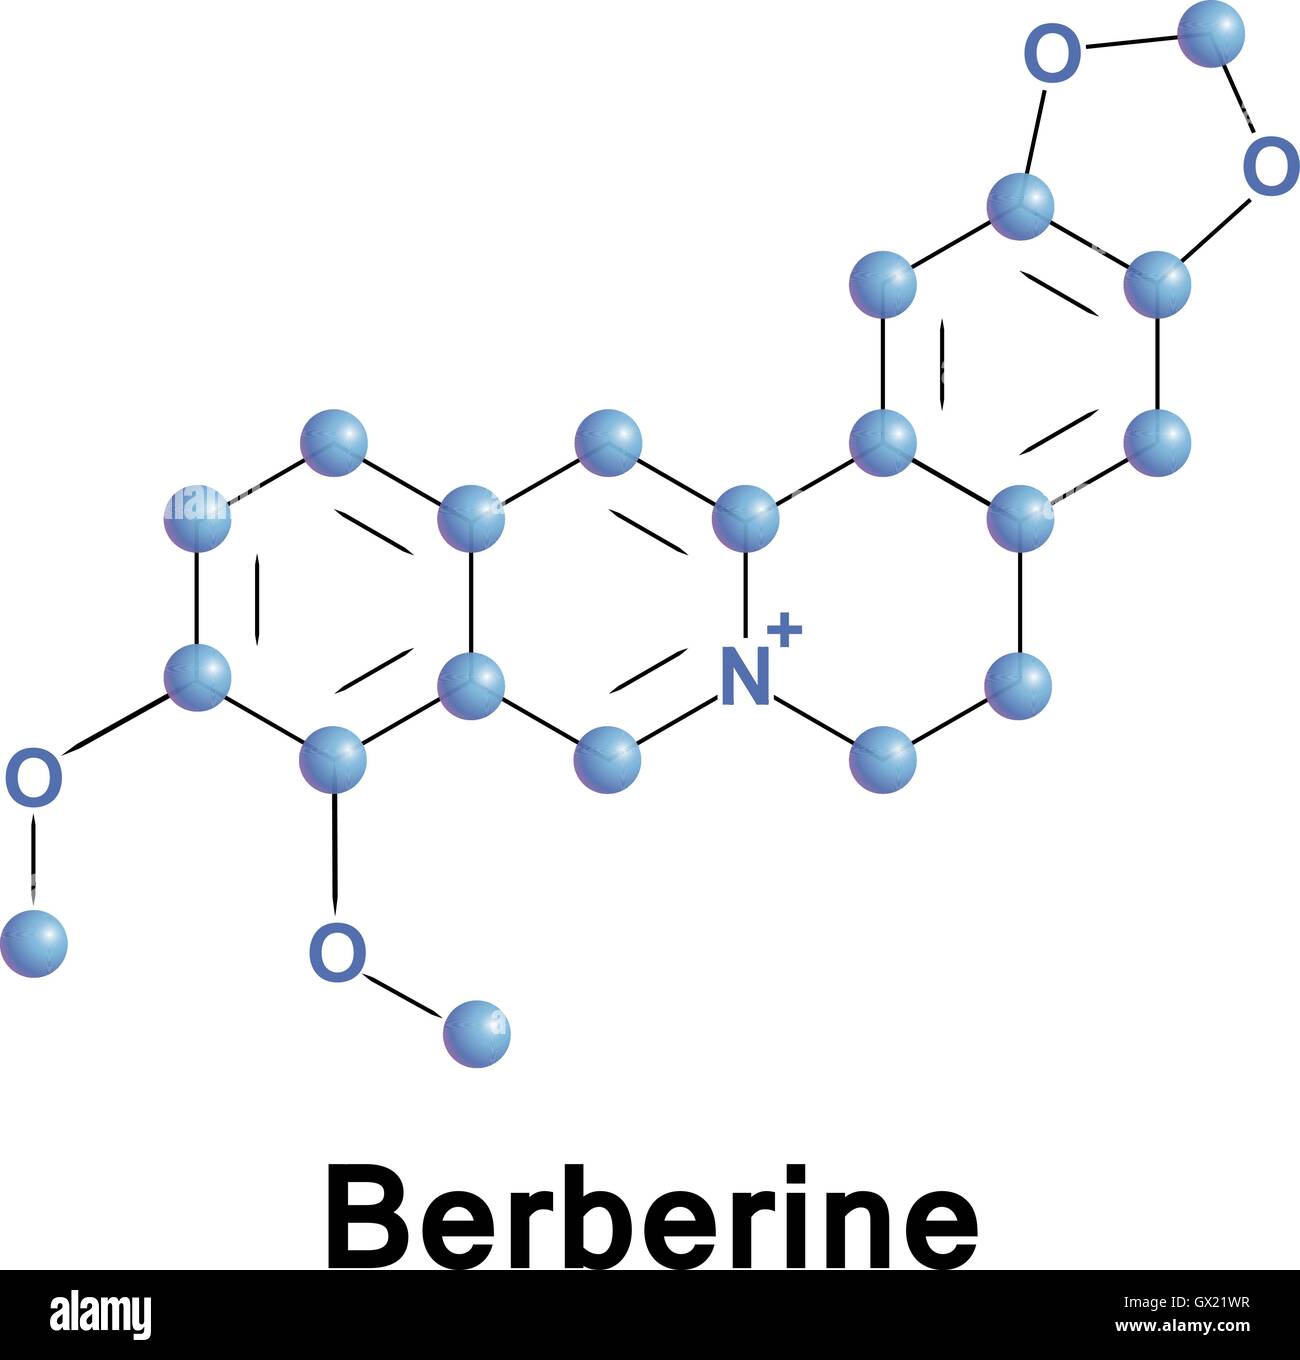 Berberine is a quaternary ammonium salt of protoberberine group of benzylisoquinoline alkaloids. uses to dye wool, leather, and  Stock Vector